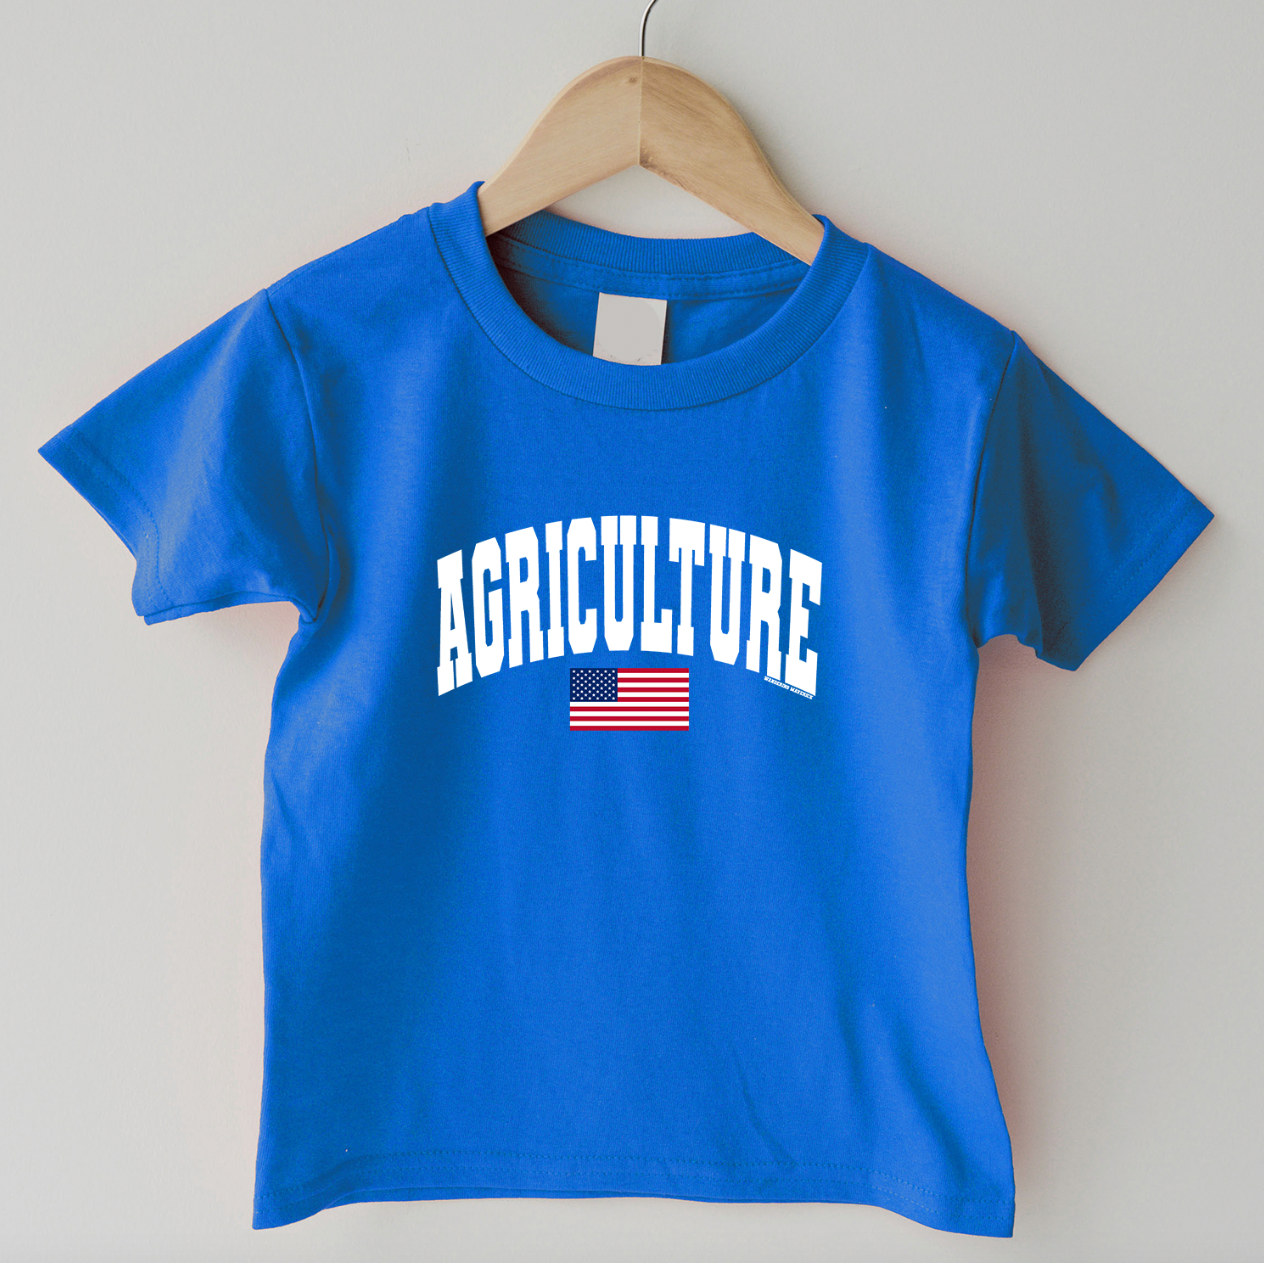 Agriculture Flag One Piece/T-Shirt (Newborn - Youth XL) - Multiple Colors!